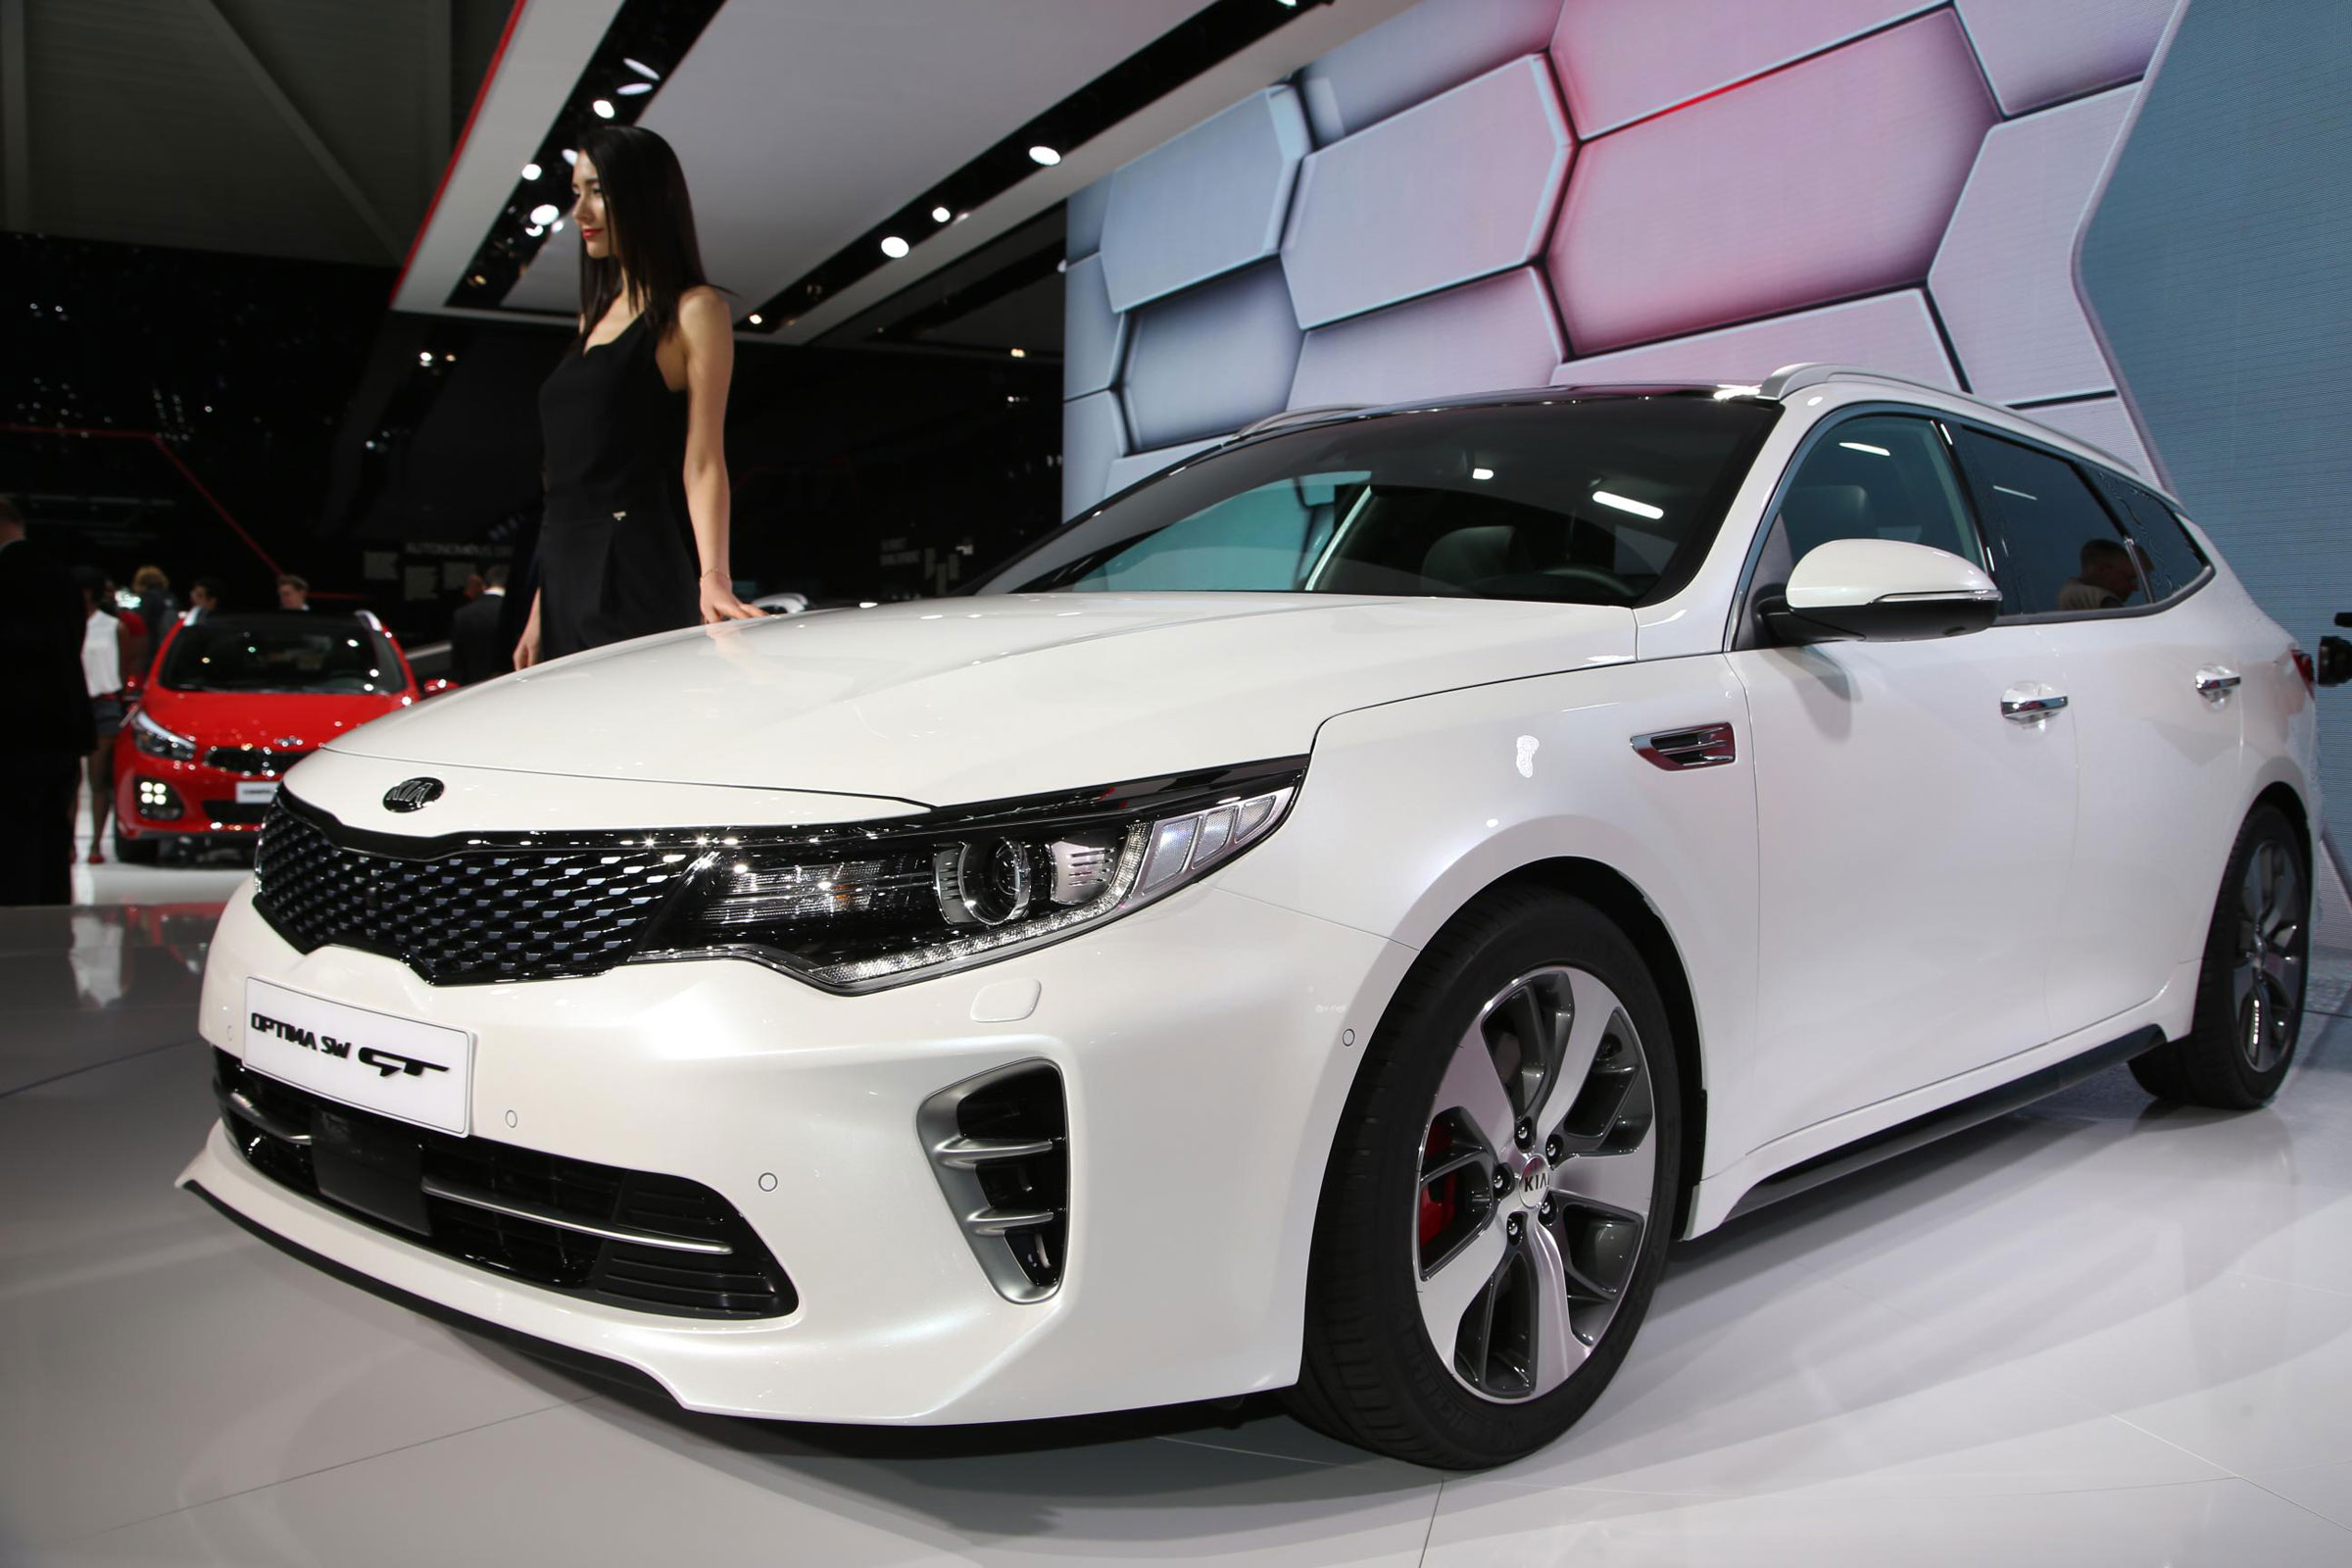 Expanded Kia GT range targets new levels of performance